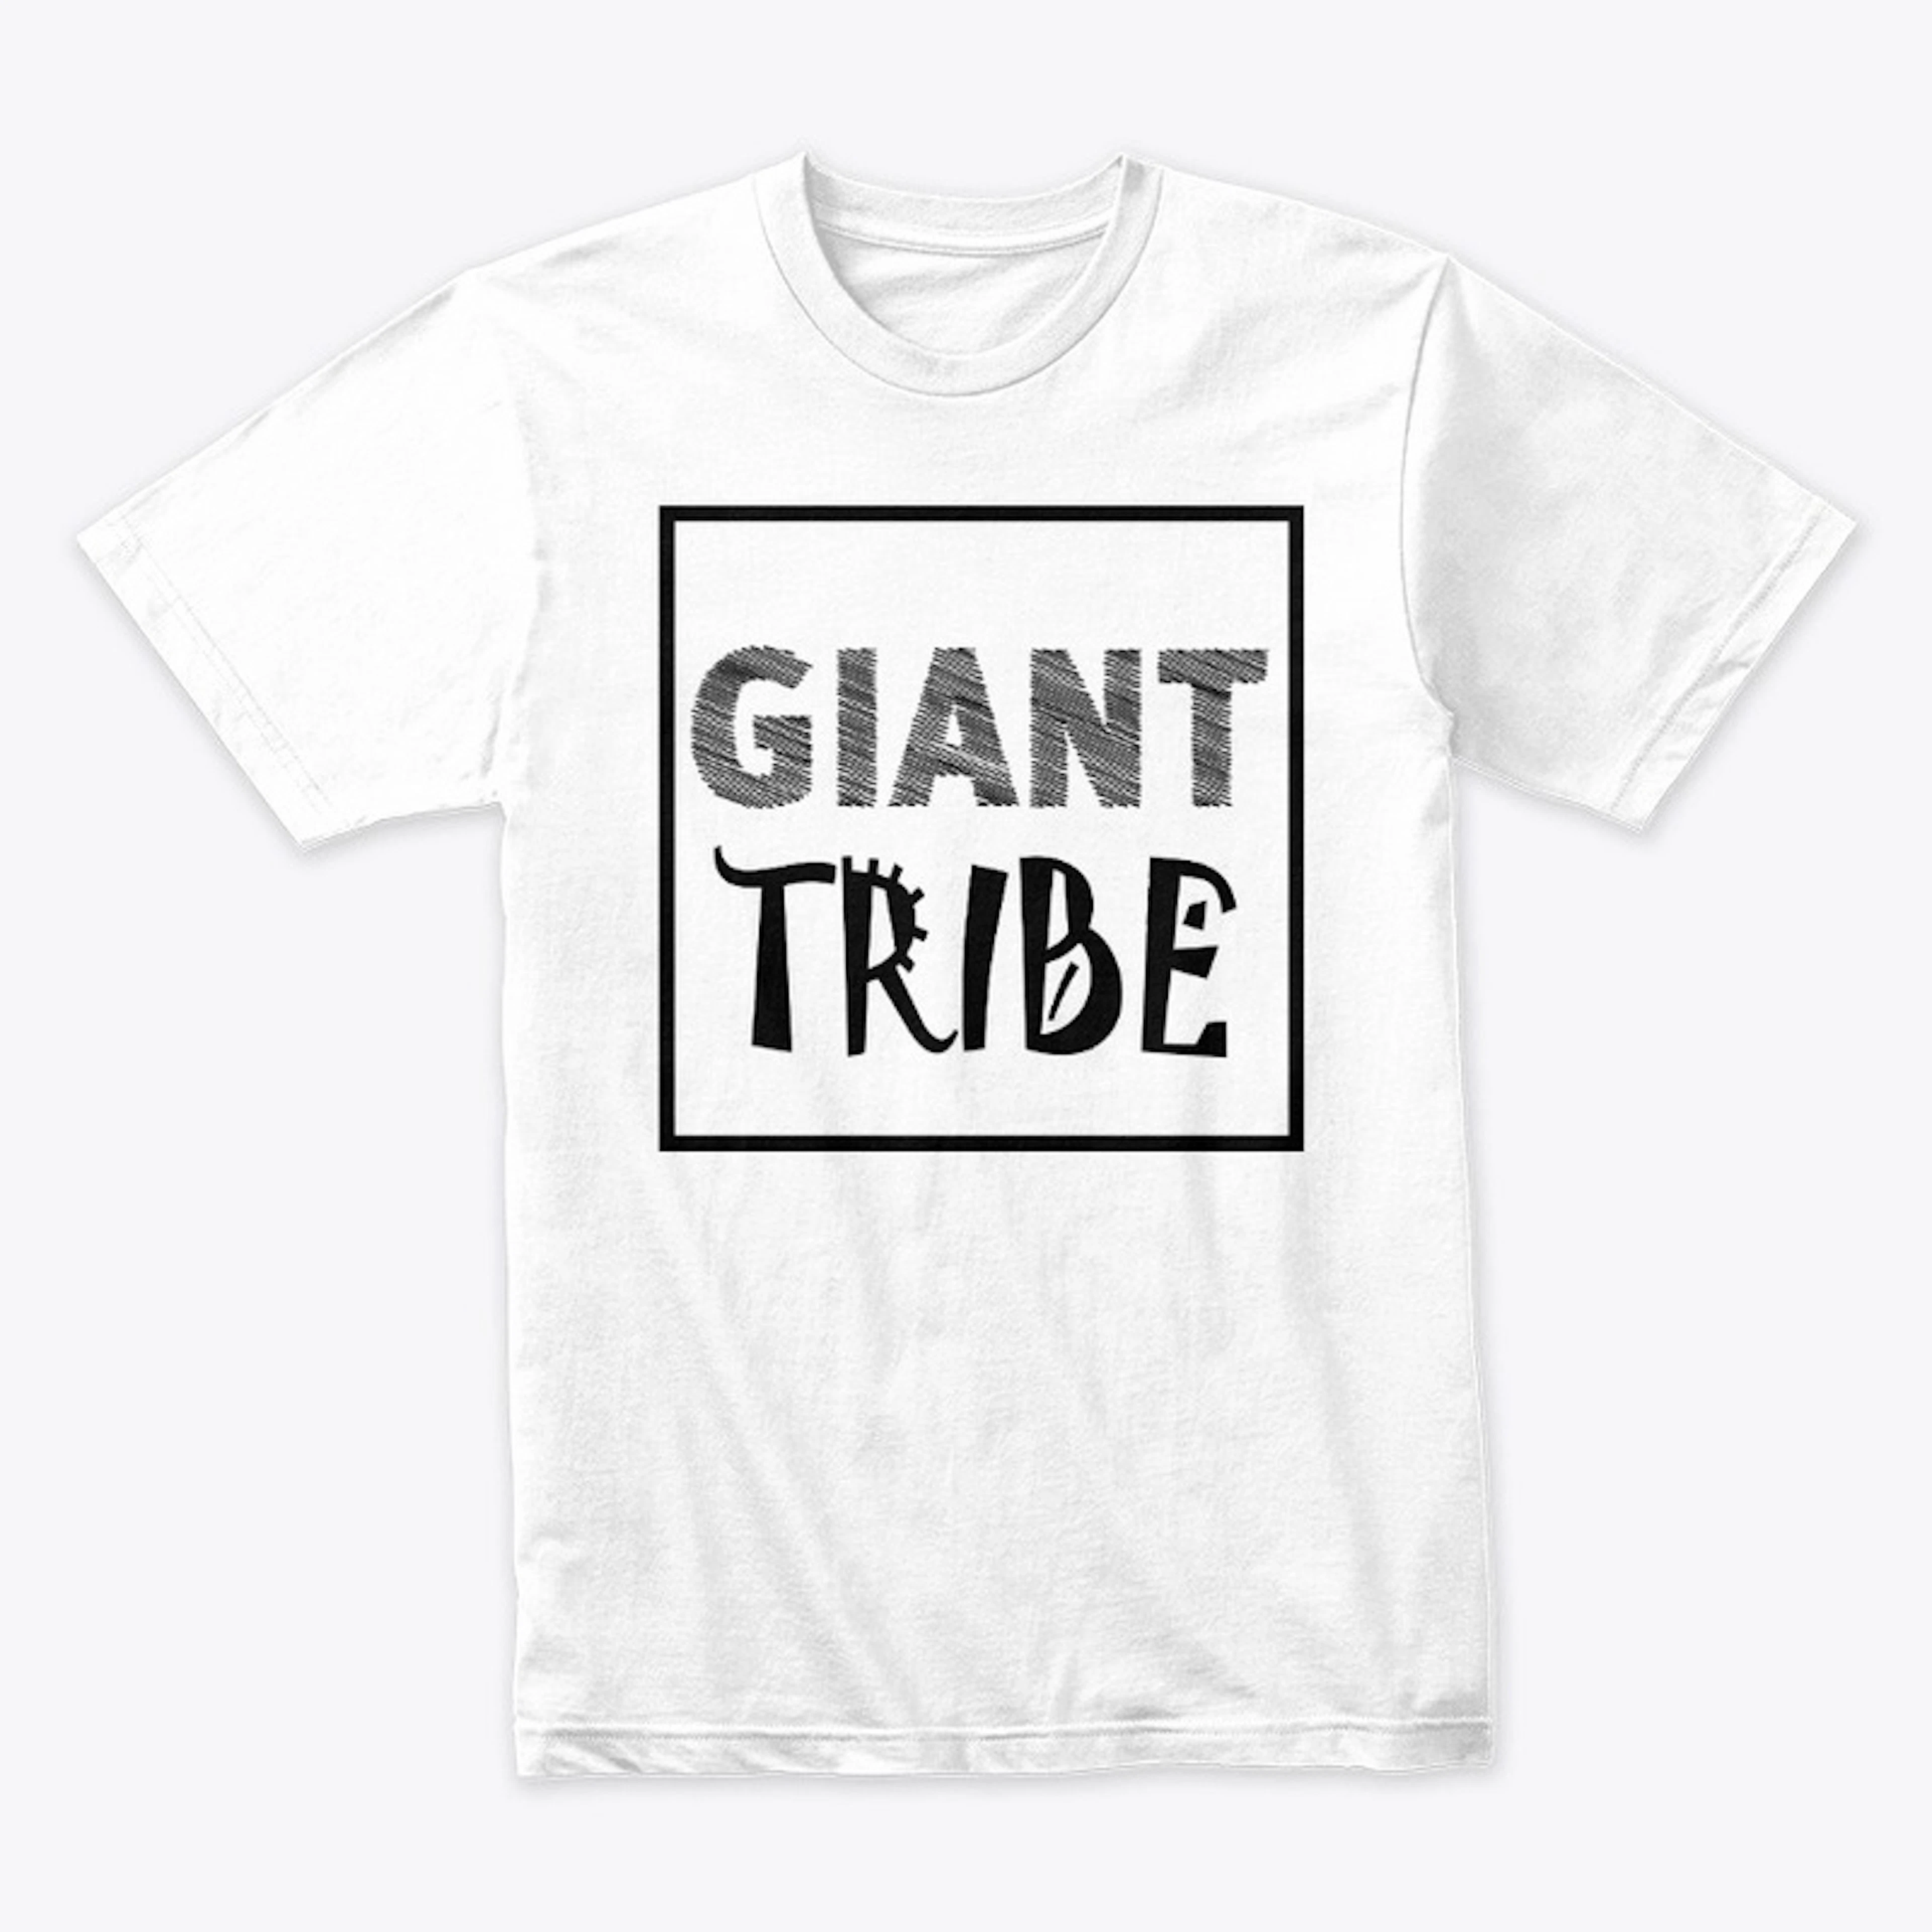 Giant Tribe